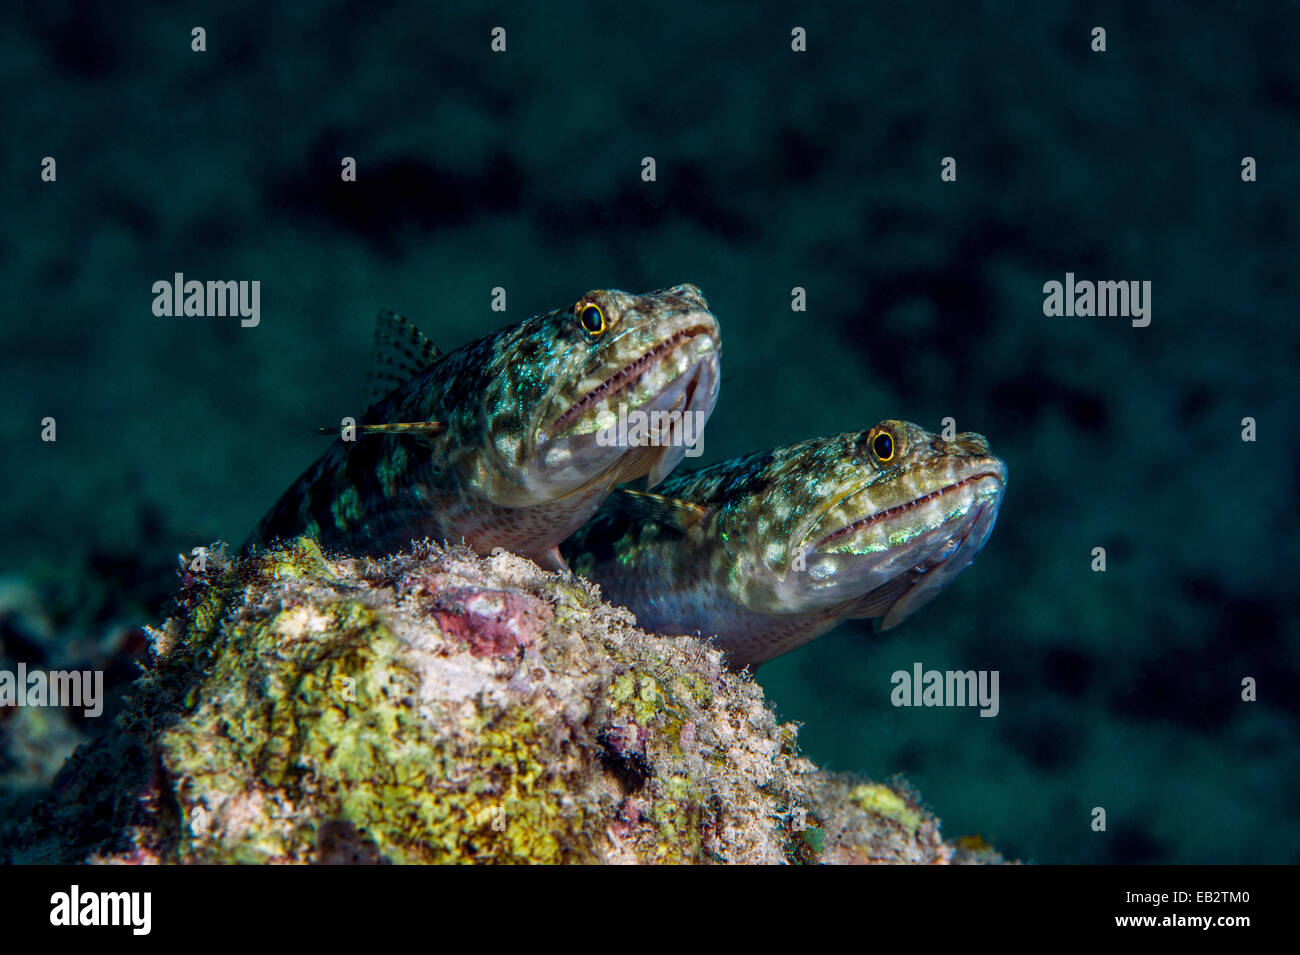 A pair of Whitespotted Goby with sharp teeth patrolling their territory on a tropical coral reef. Stock Photo